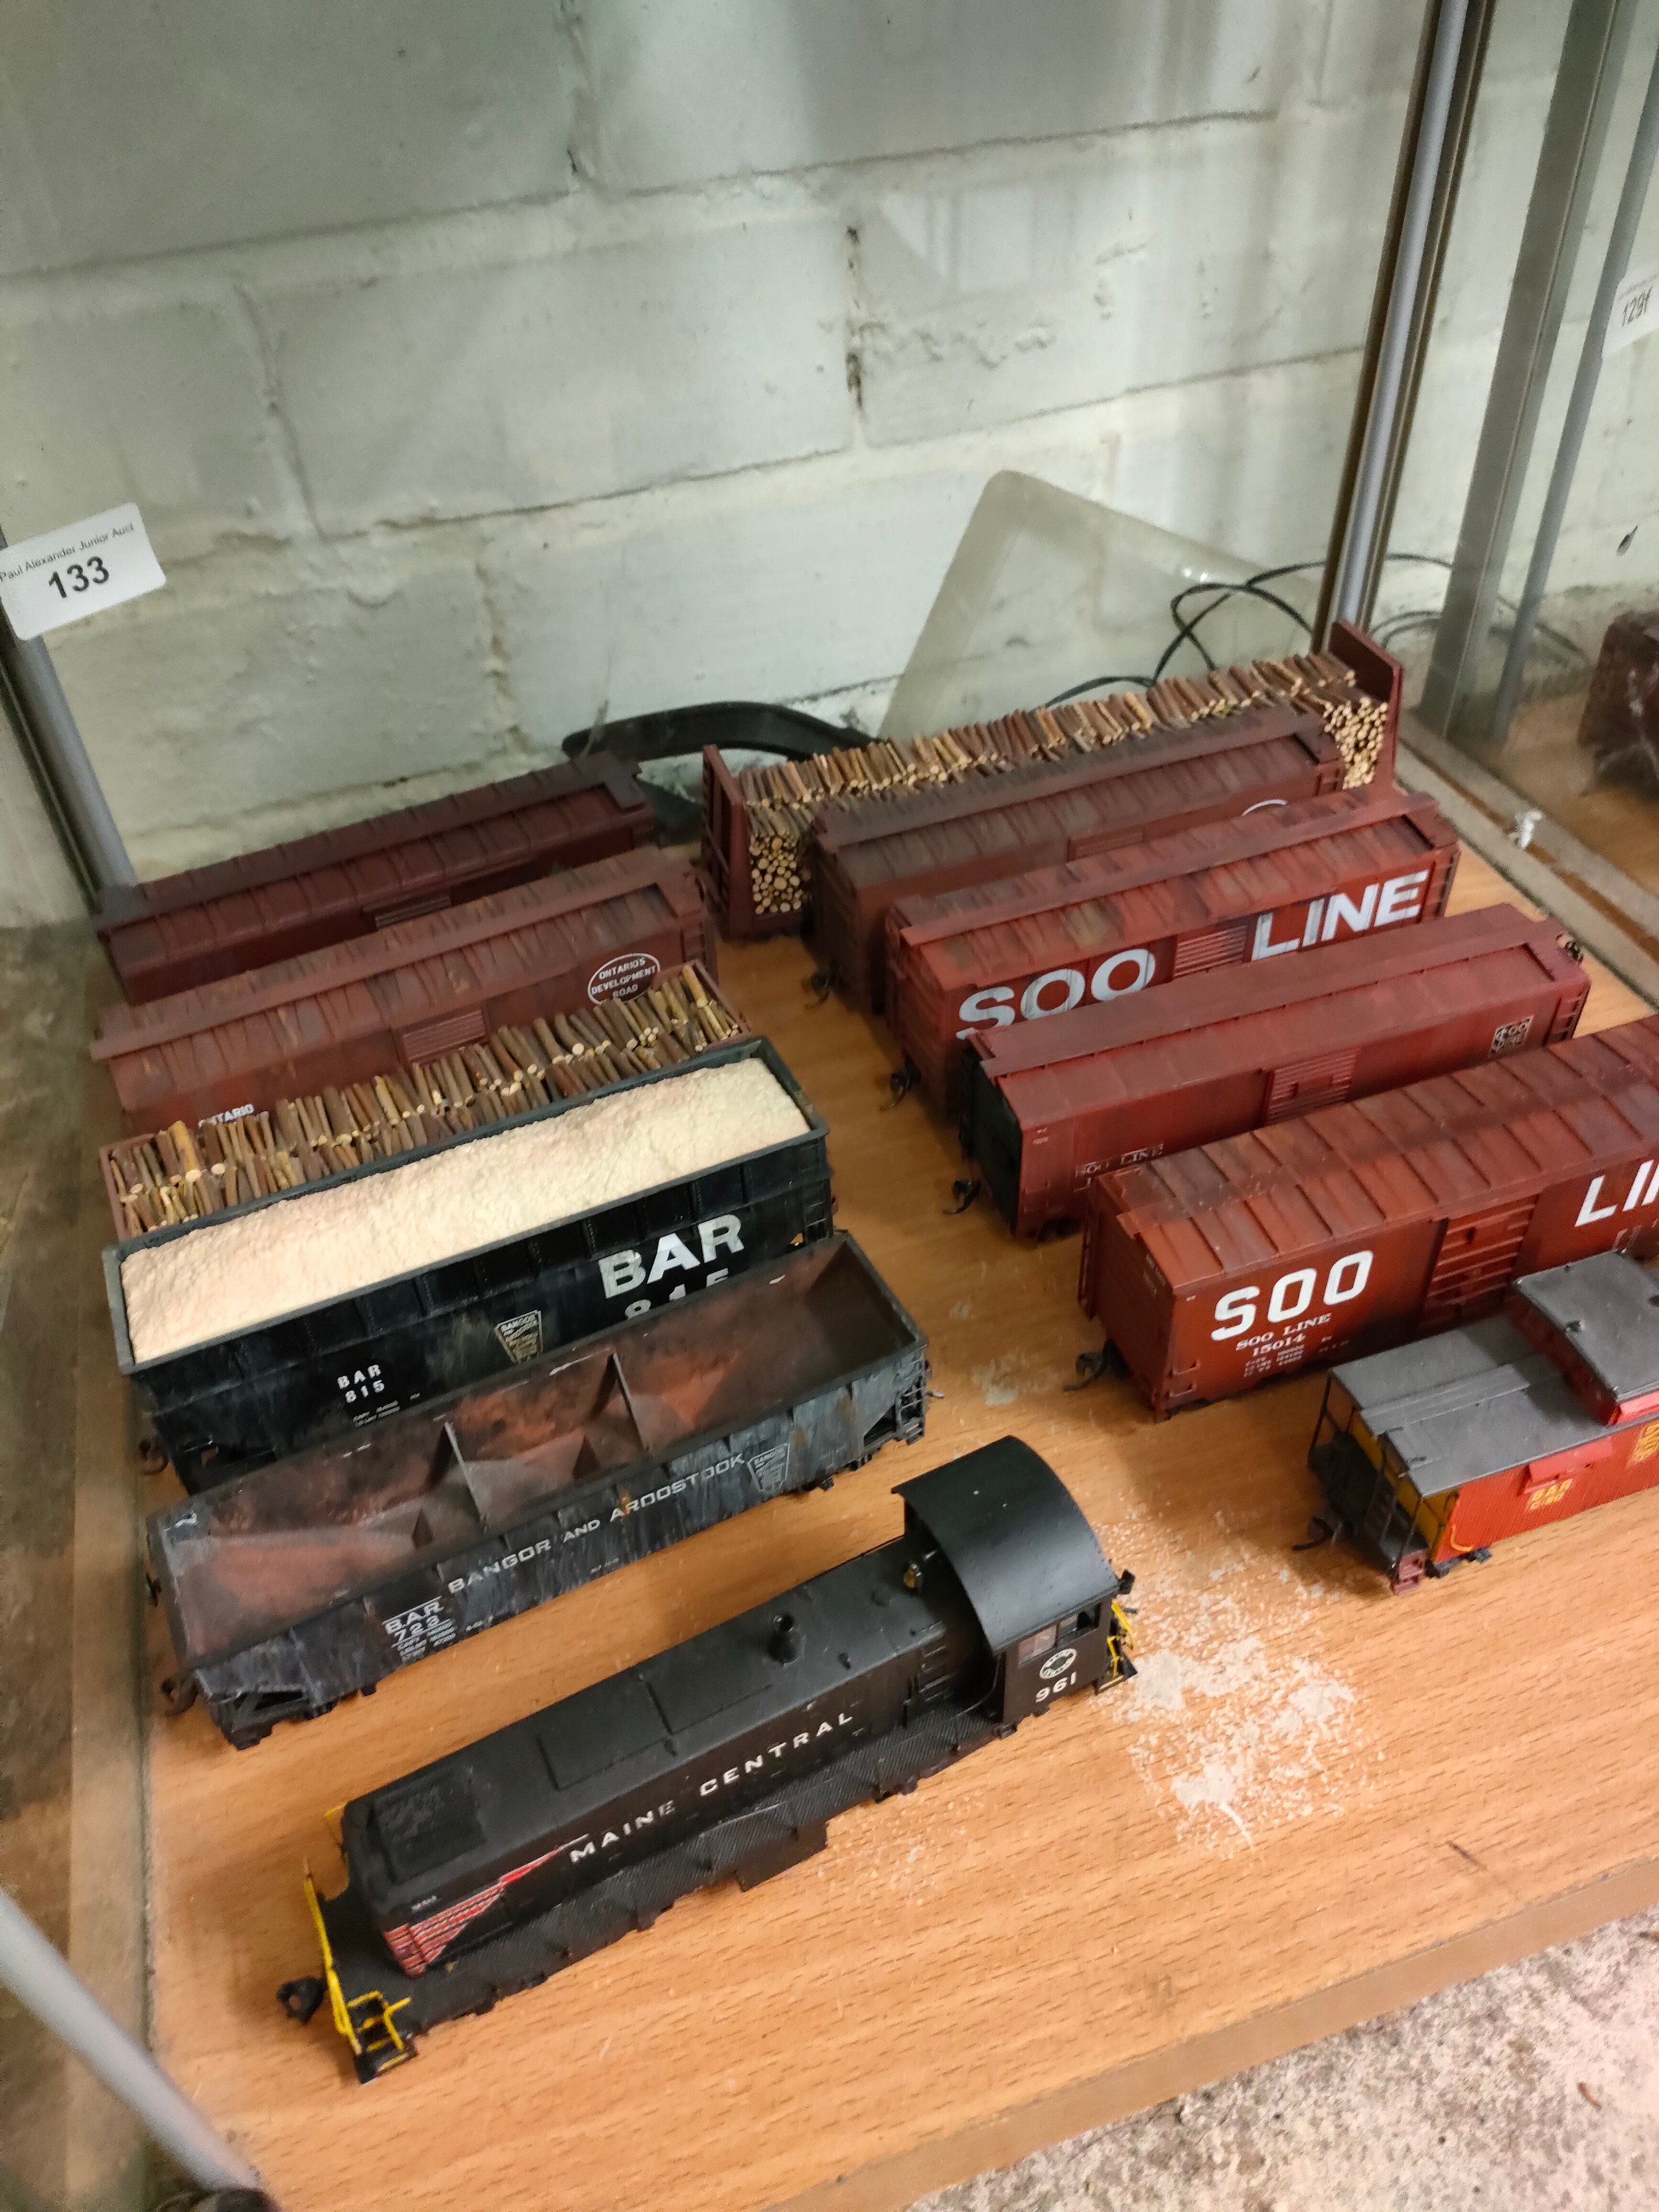 Maine central 961 train model together with rolling carriages. - Image 3 of 3